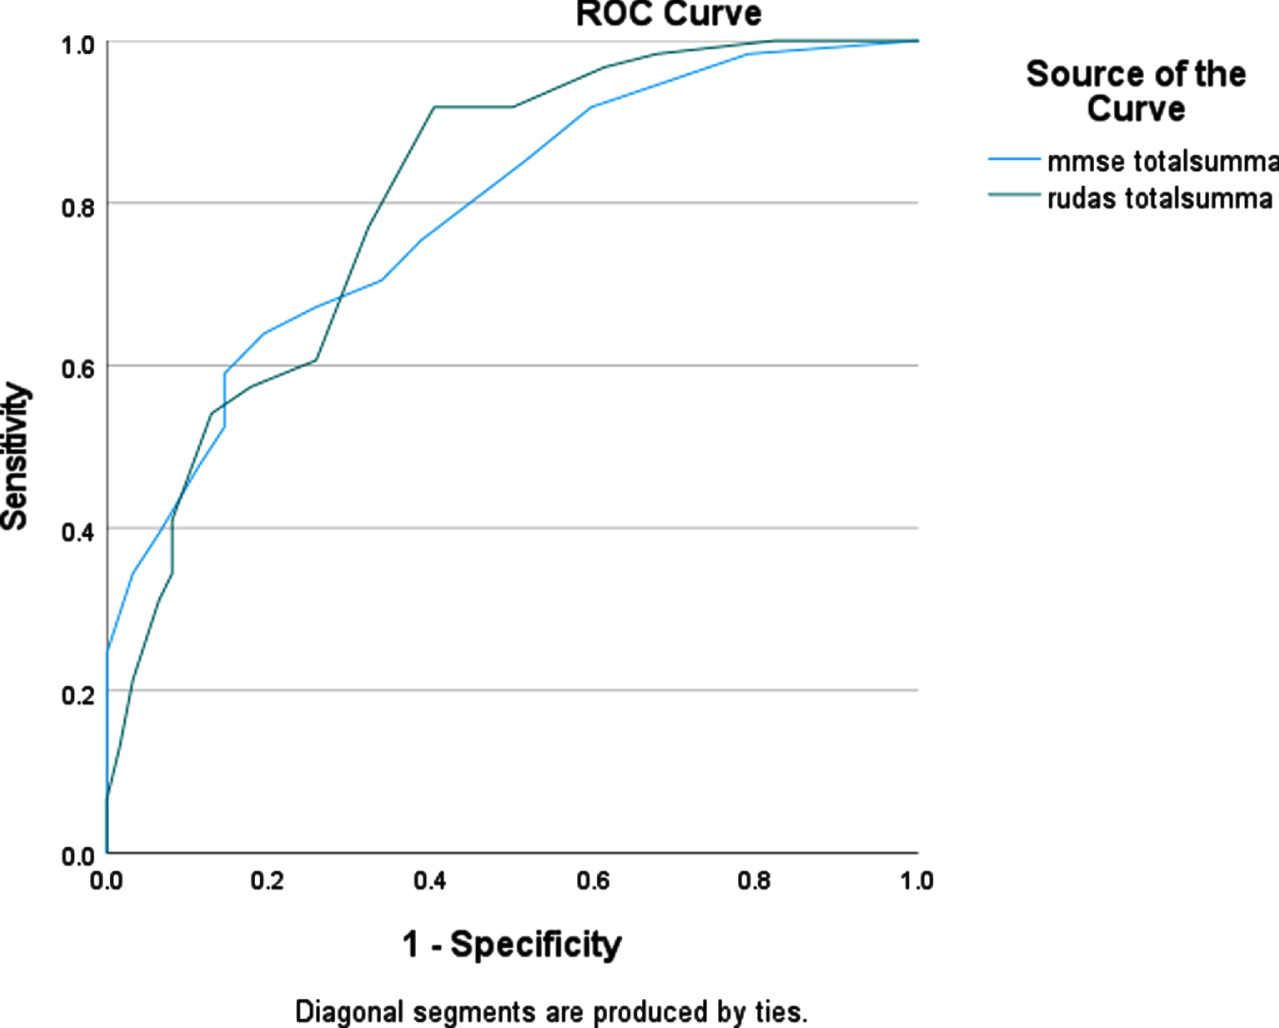 ROC curve for the RUDAS-S and the MMSE-SR (n = 123) for detecting dementia.